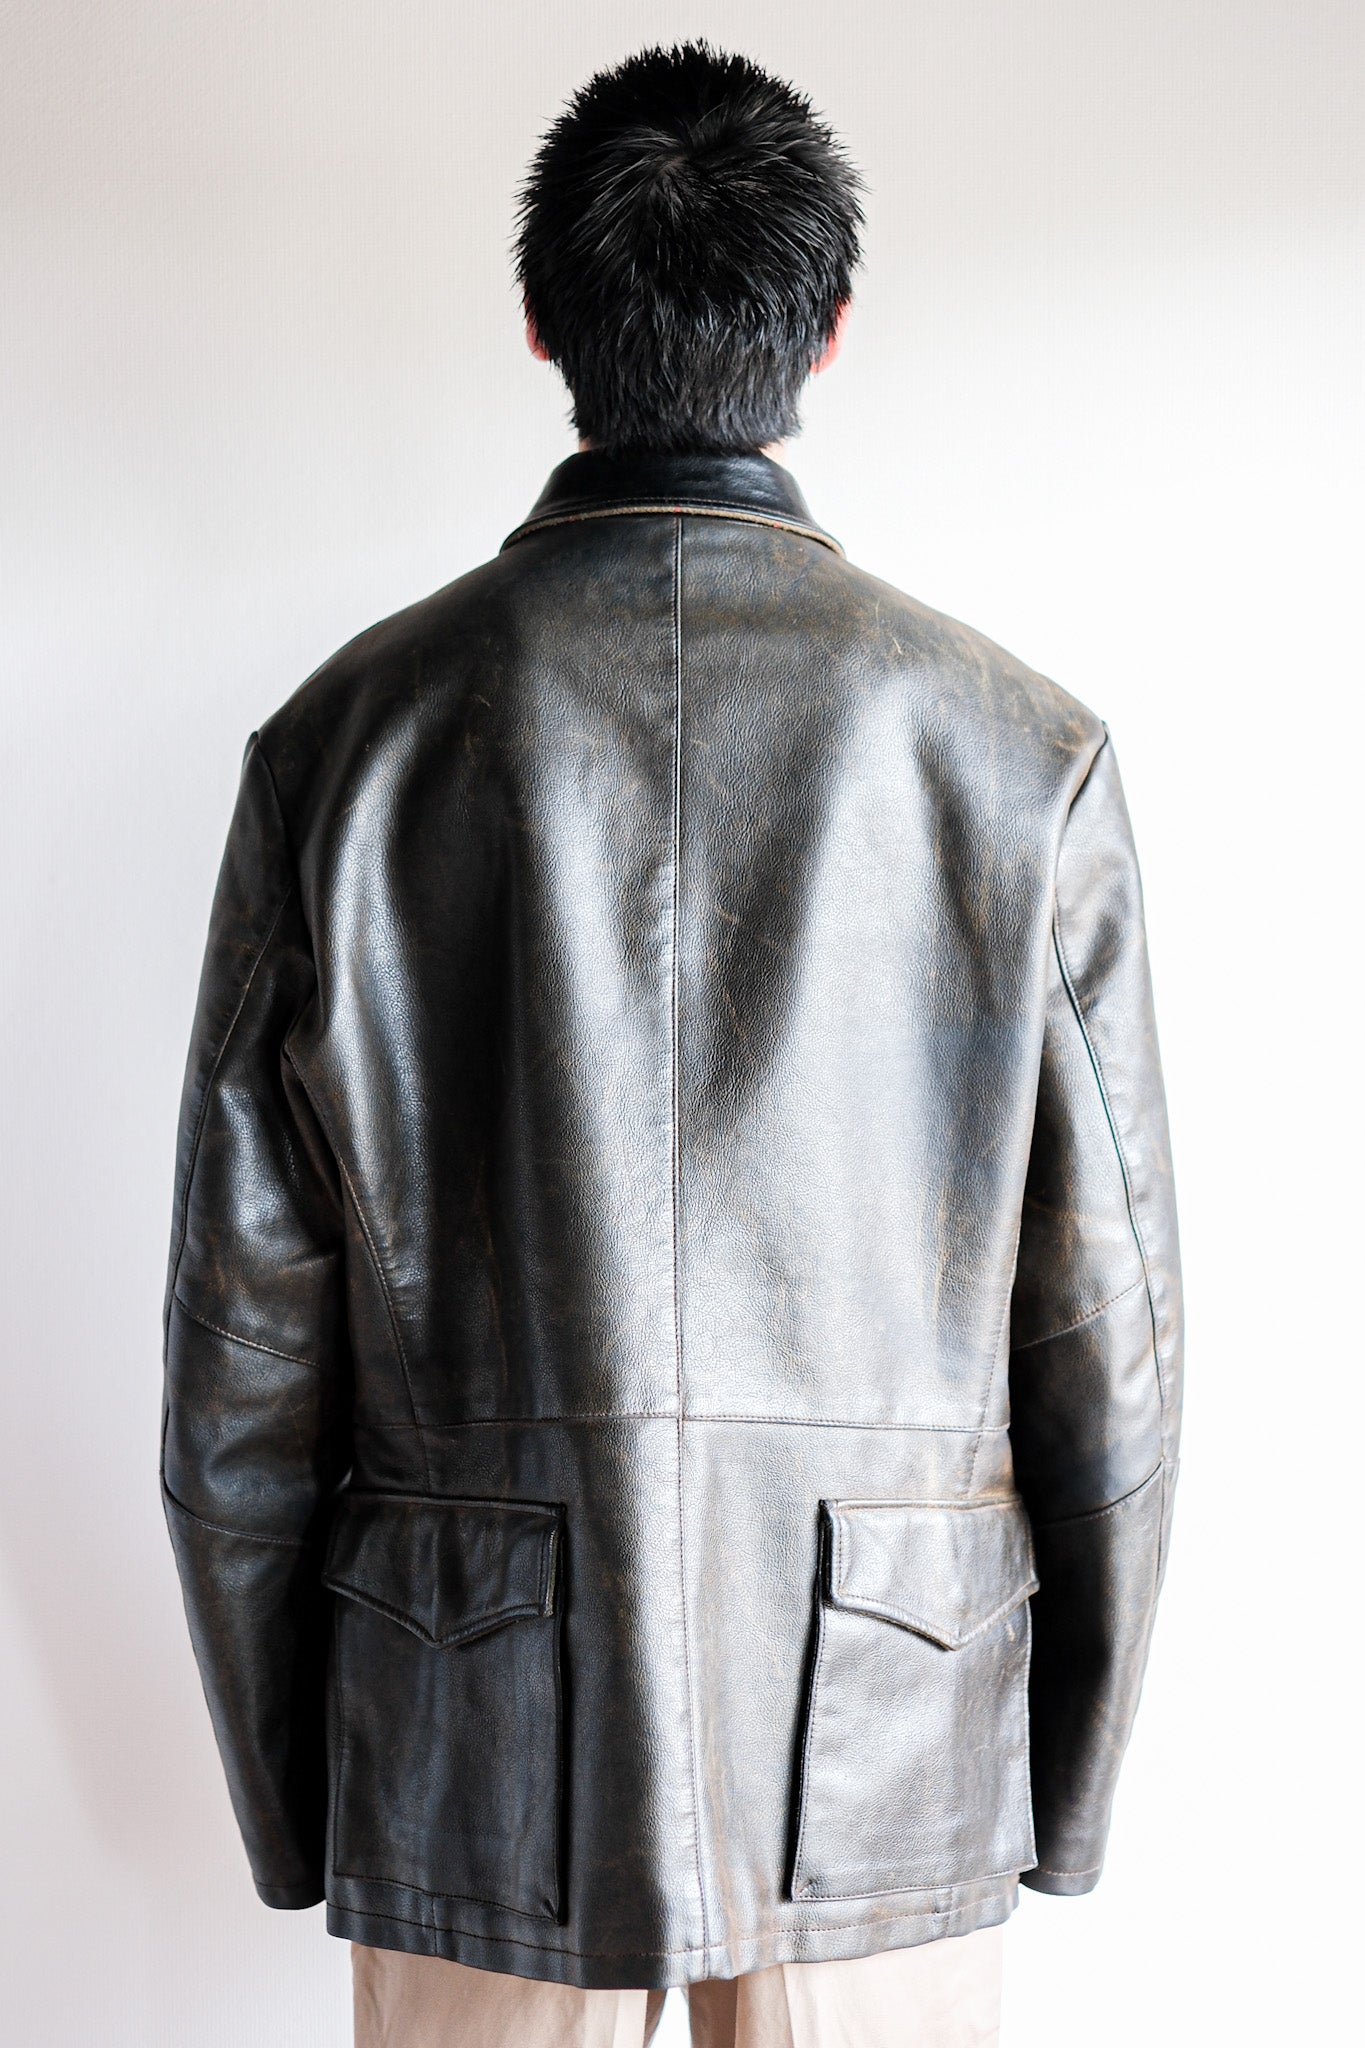 【~90’s】Old ARMANI JEANS M-59 Type PVC Leather Jacket